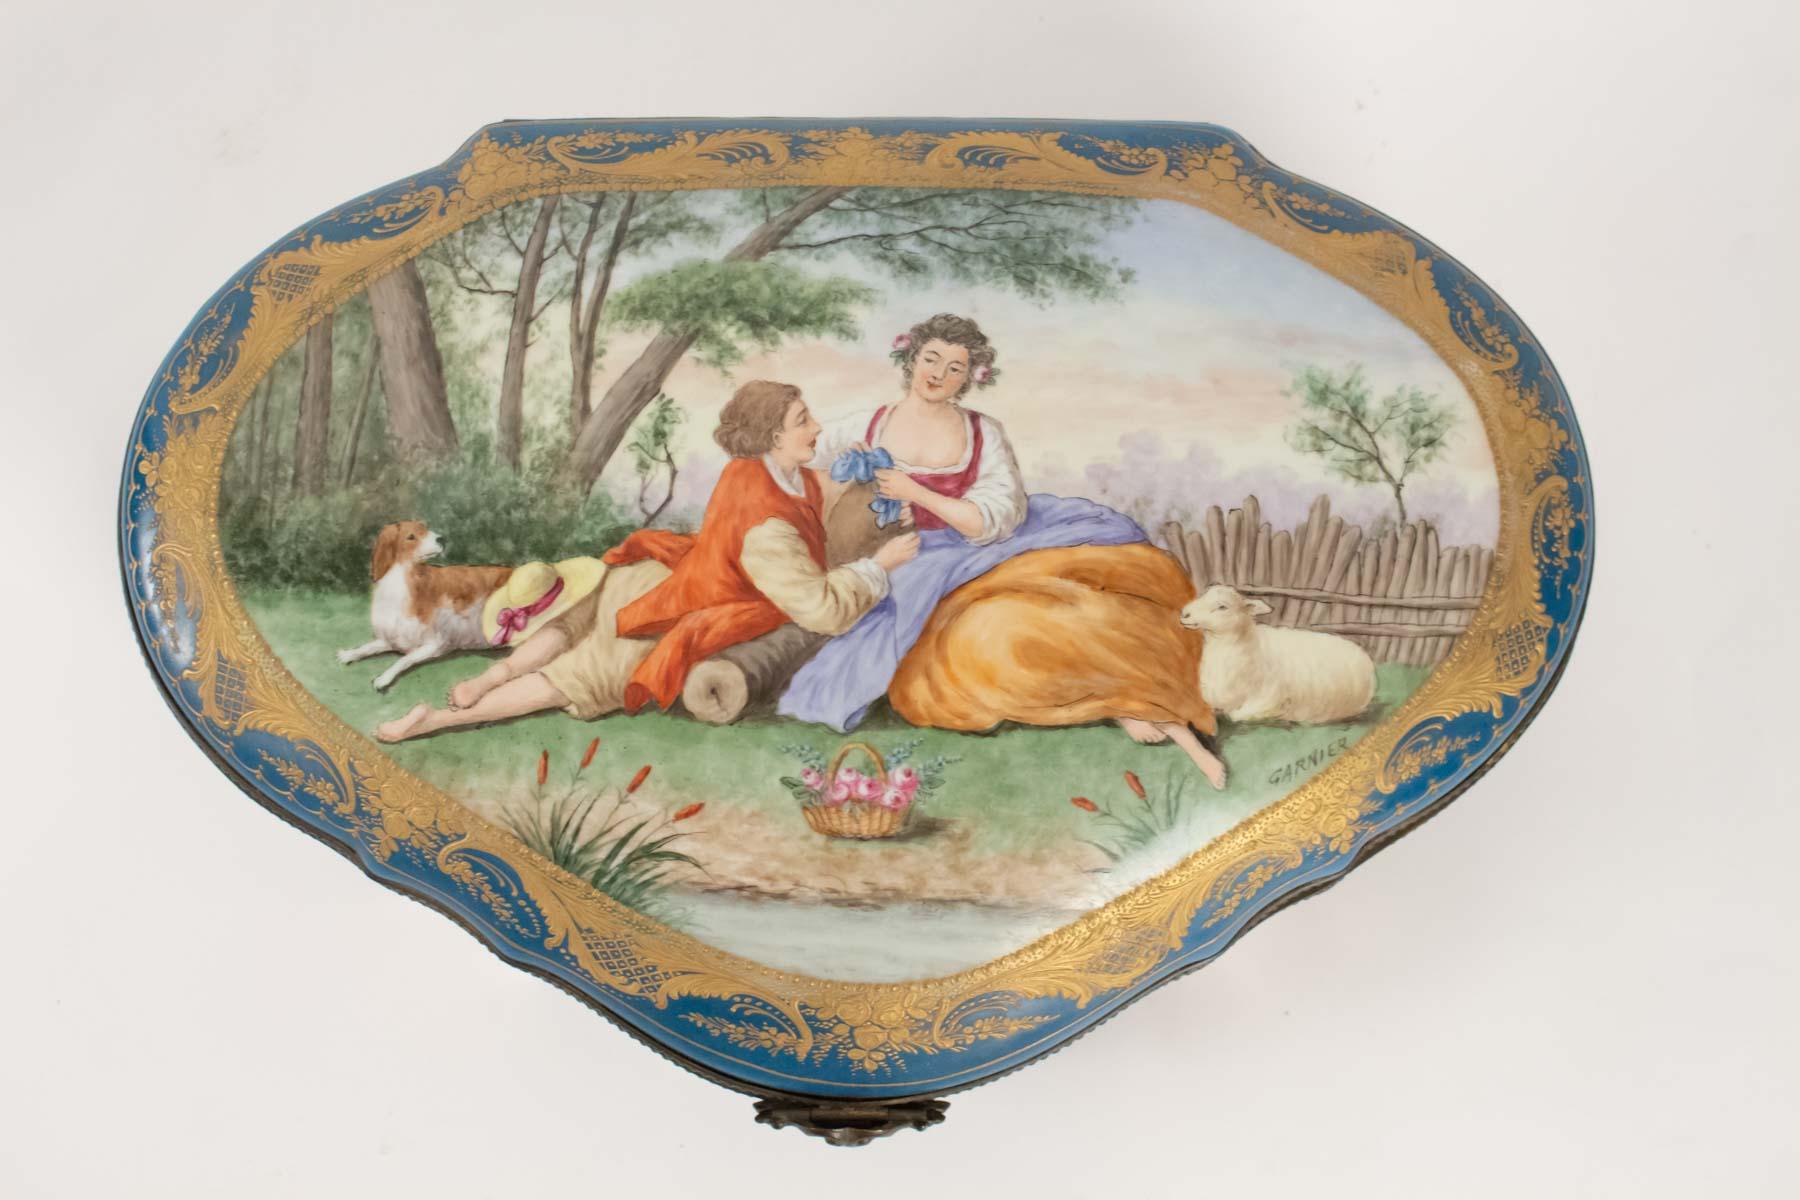 Napoleon III Box Porcelain, Signed, Decorated Inside and Outside, 19th Century